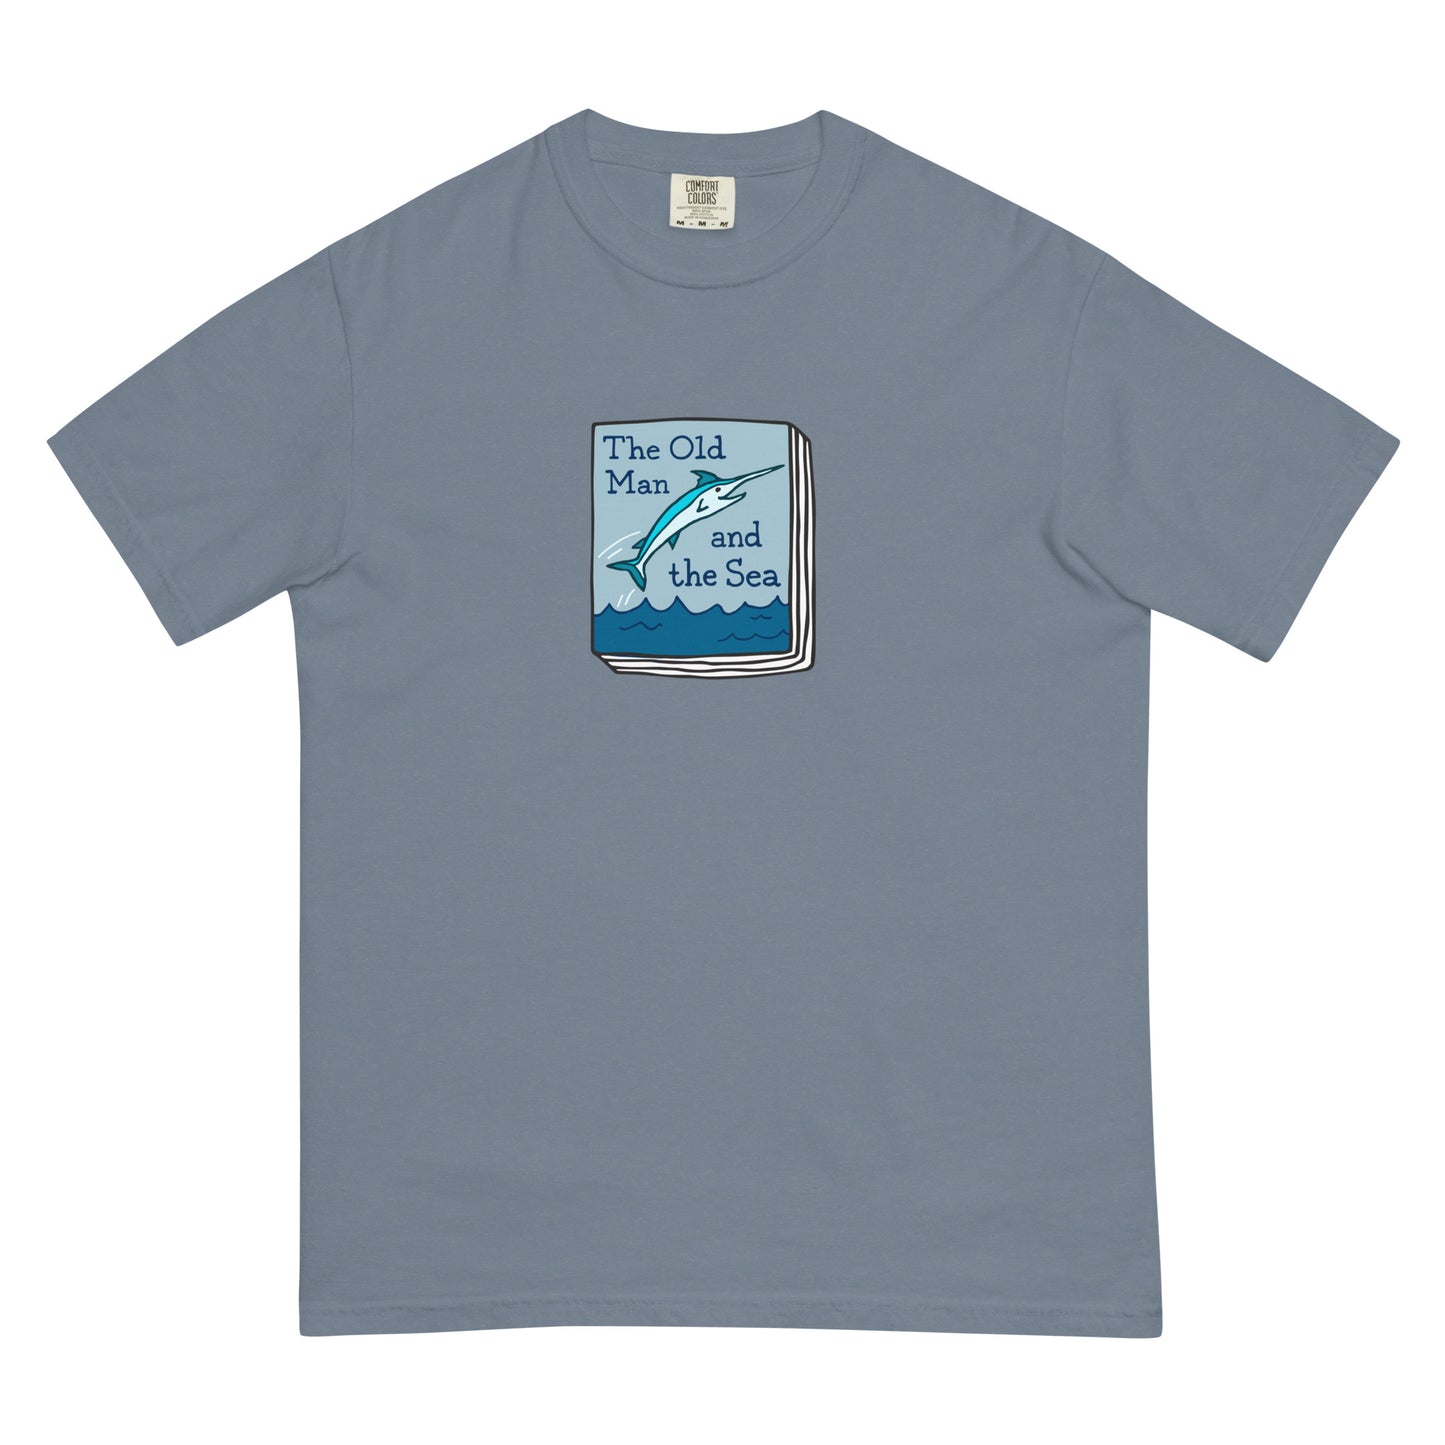 Book Shirt: The Old Man and the Sea